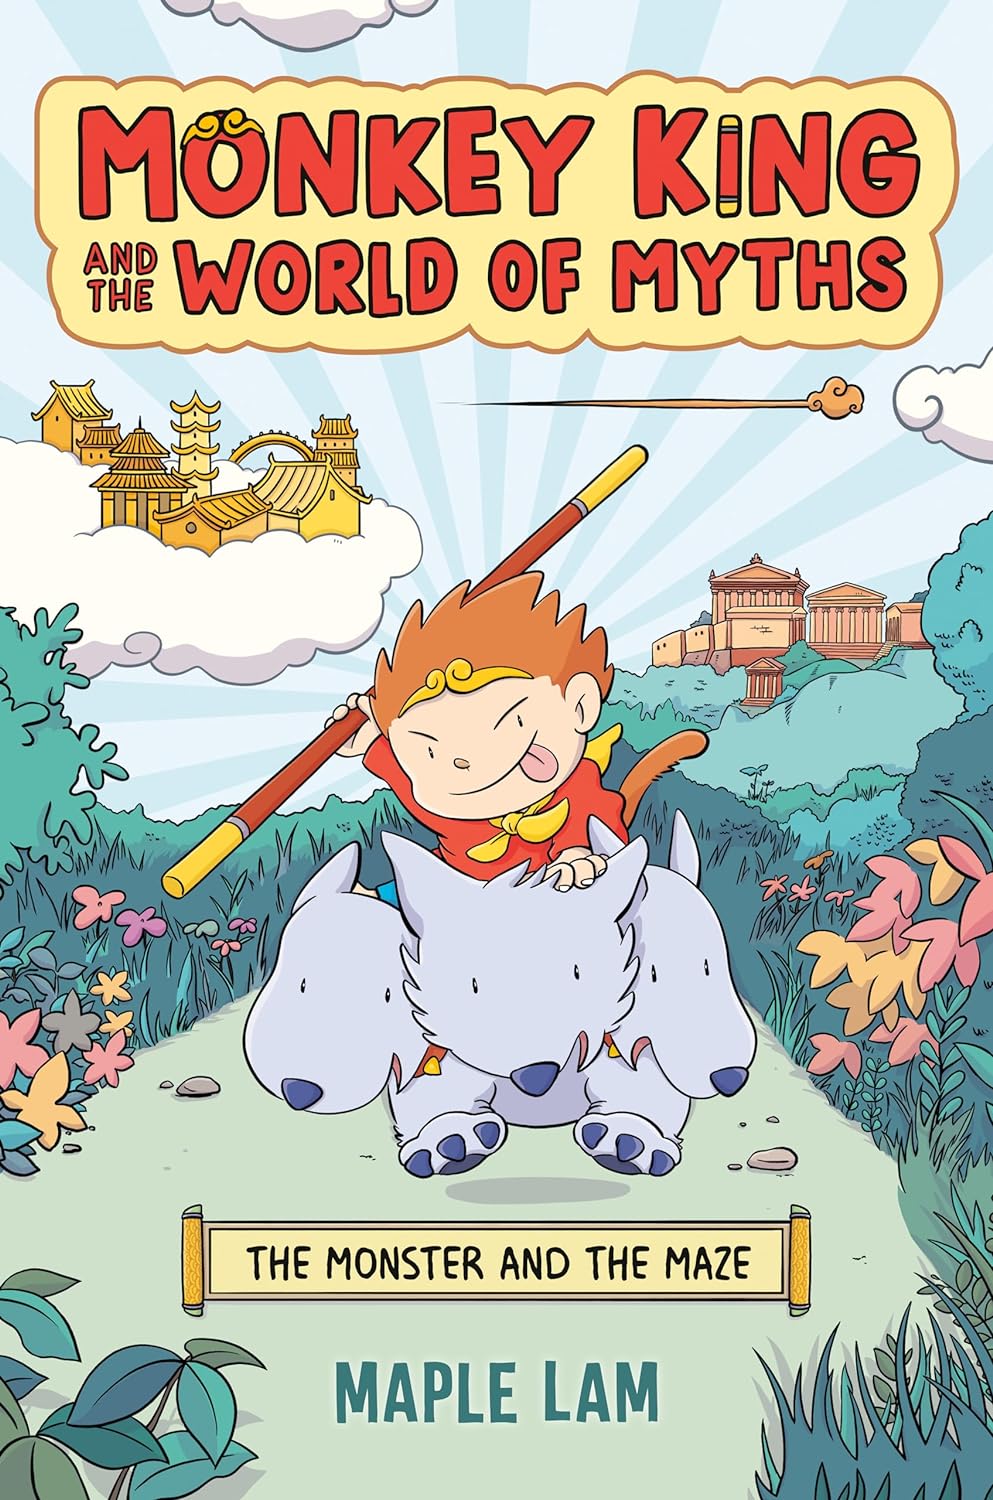 Monkey King and the World of Myths: The Monster and the Maze | Review